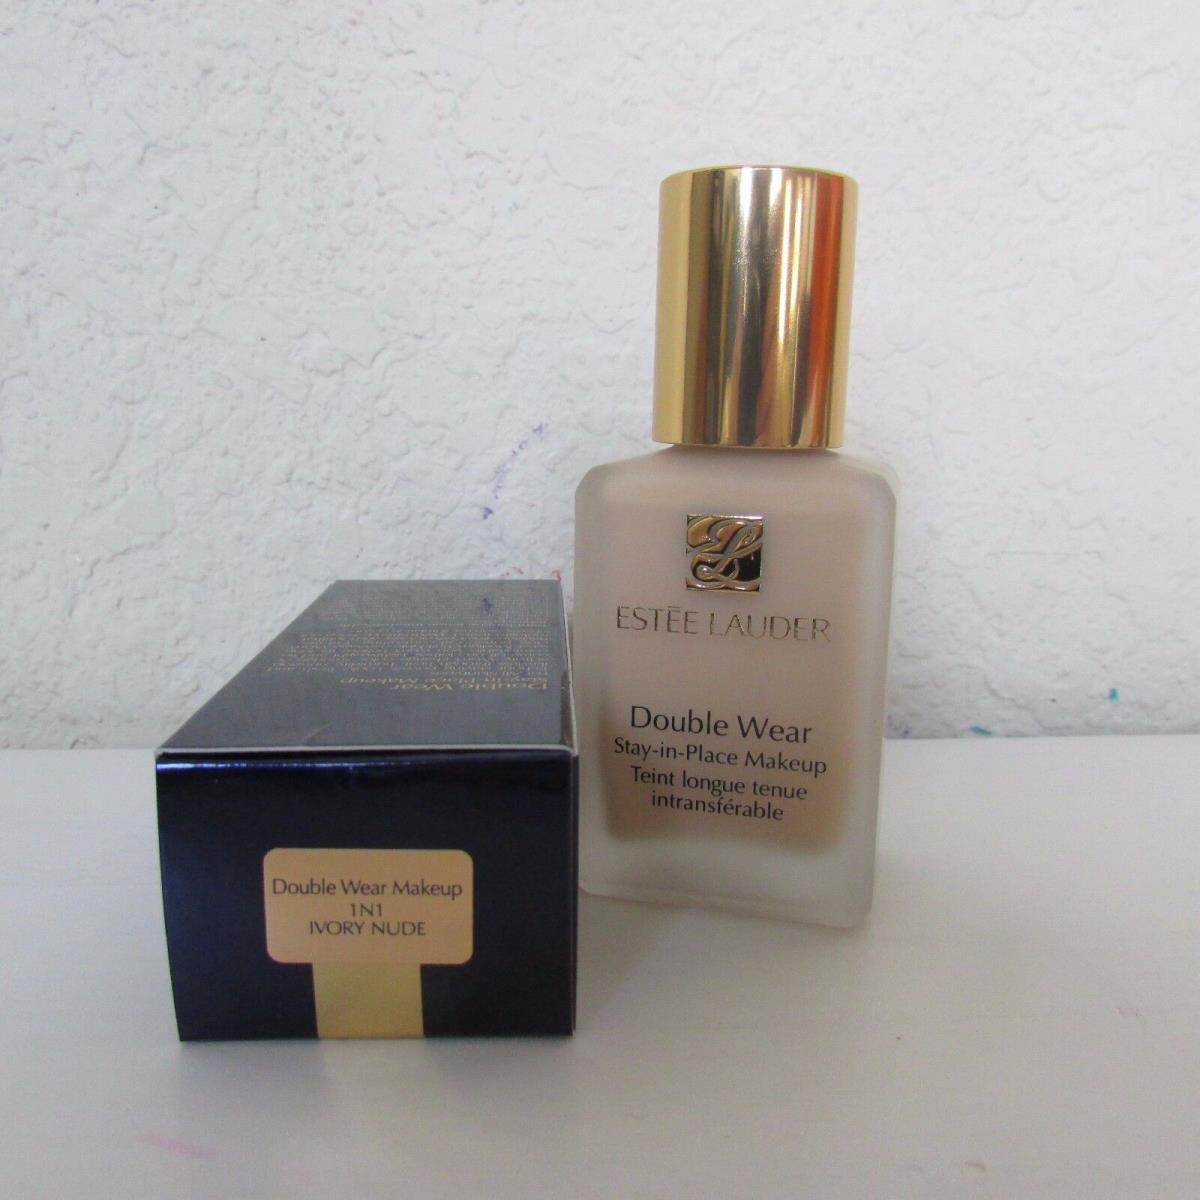 Estee Lauder Double Wear Stay-in-place Makeup Choose Your Shade 1.0 Oz/30 ml 1N1 Ivory Nude